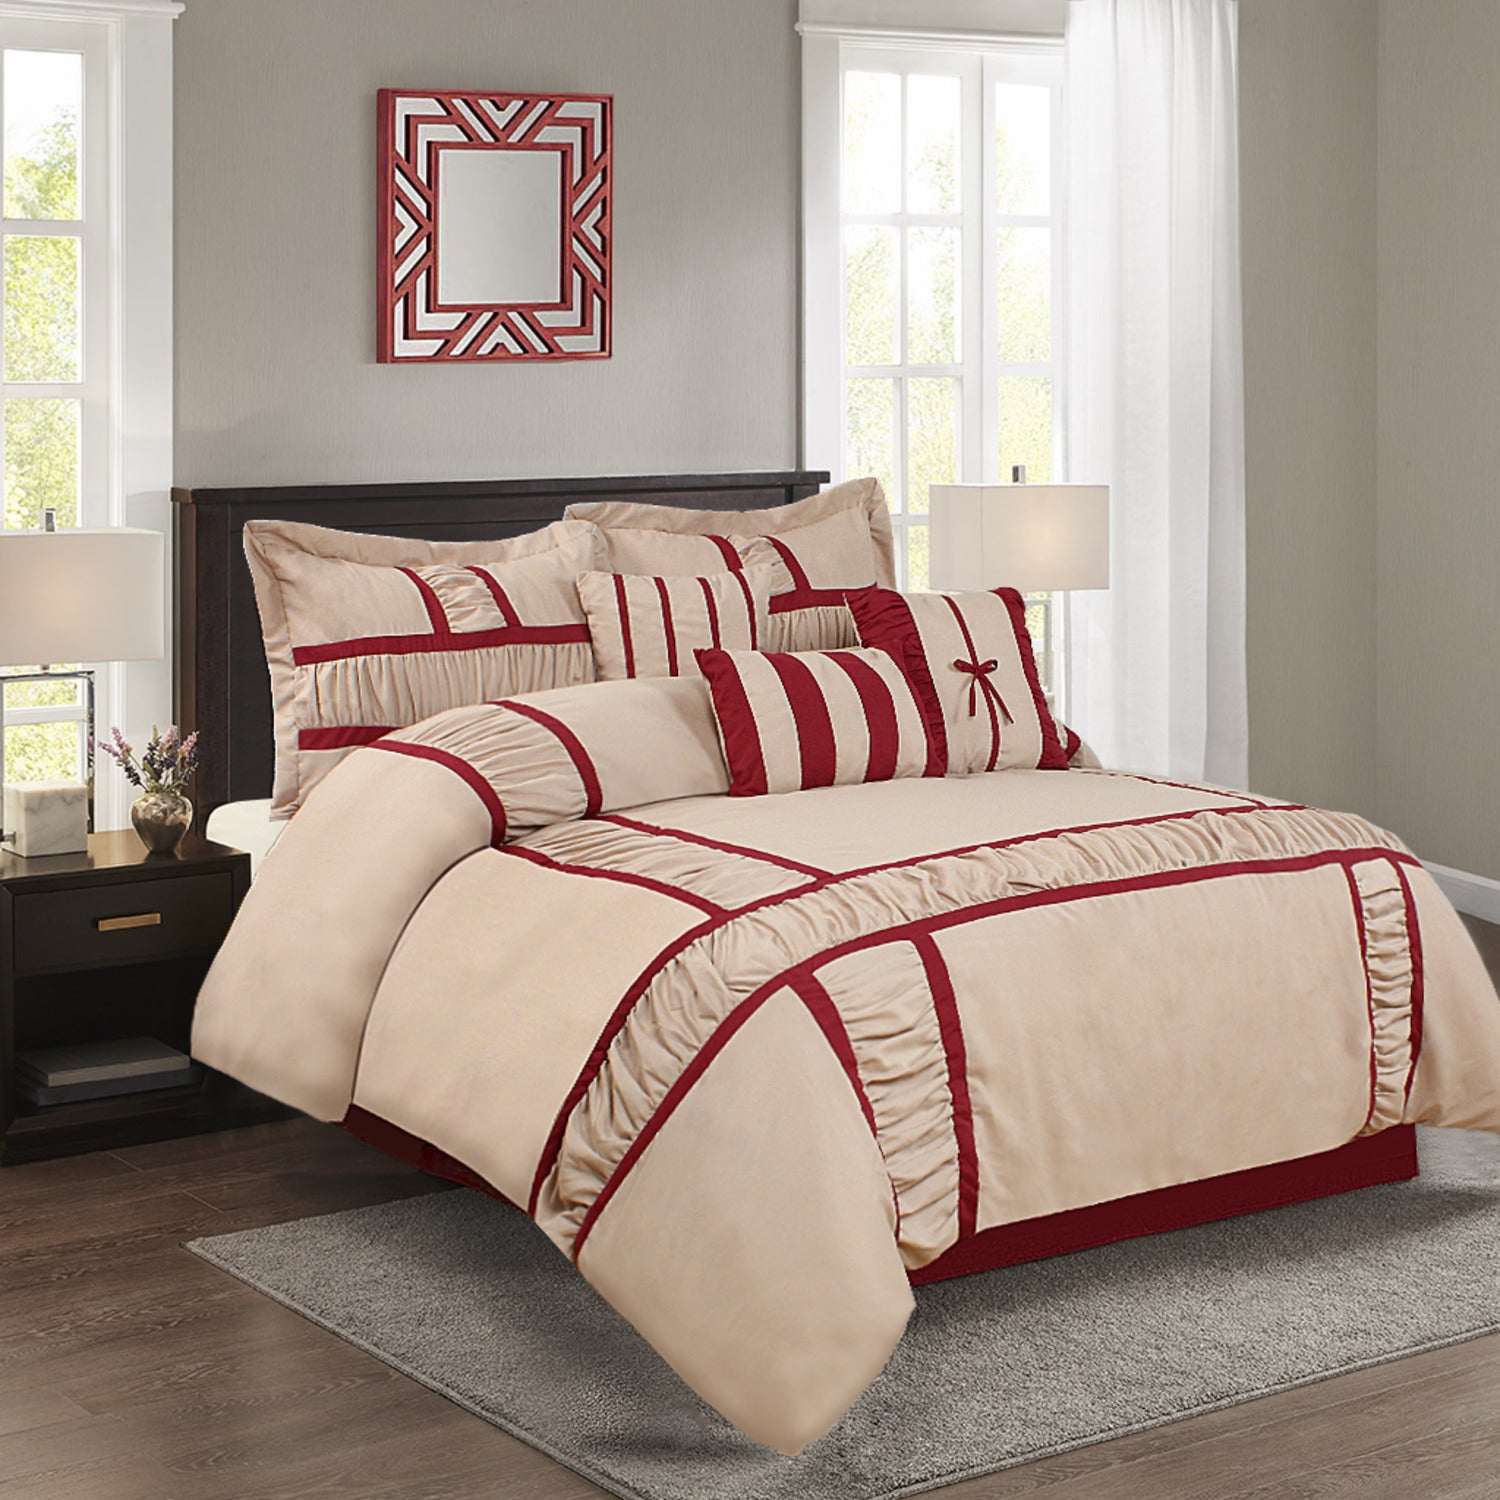 MARMA 7pc TAUPE Bedding Comforter Set. Ruffle & Patchwork, Microfiber Fabric, Fade Resistant, Super Soft, Bed in a Bag